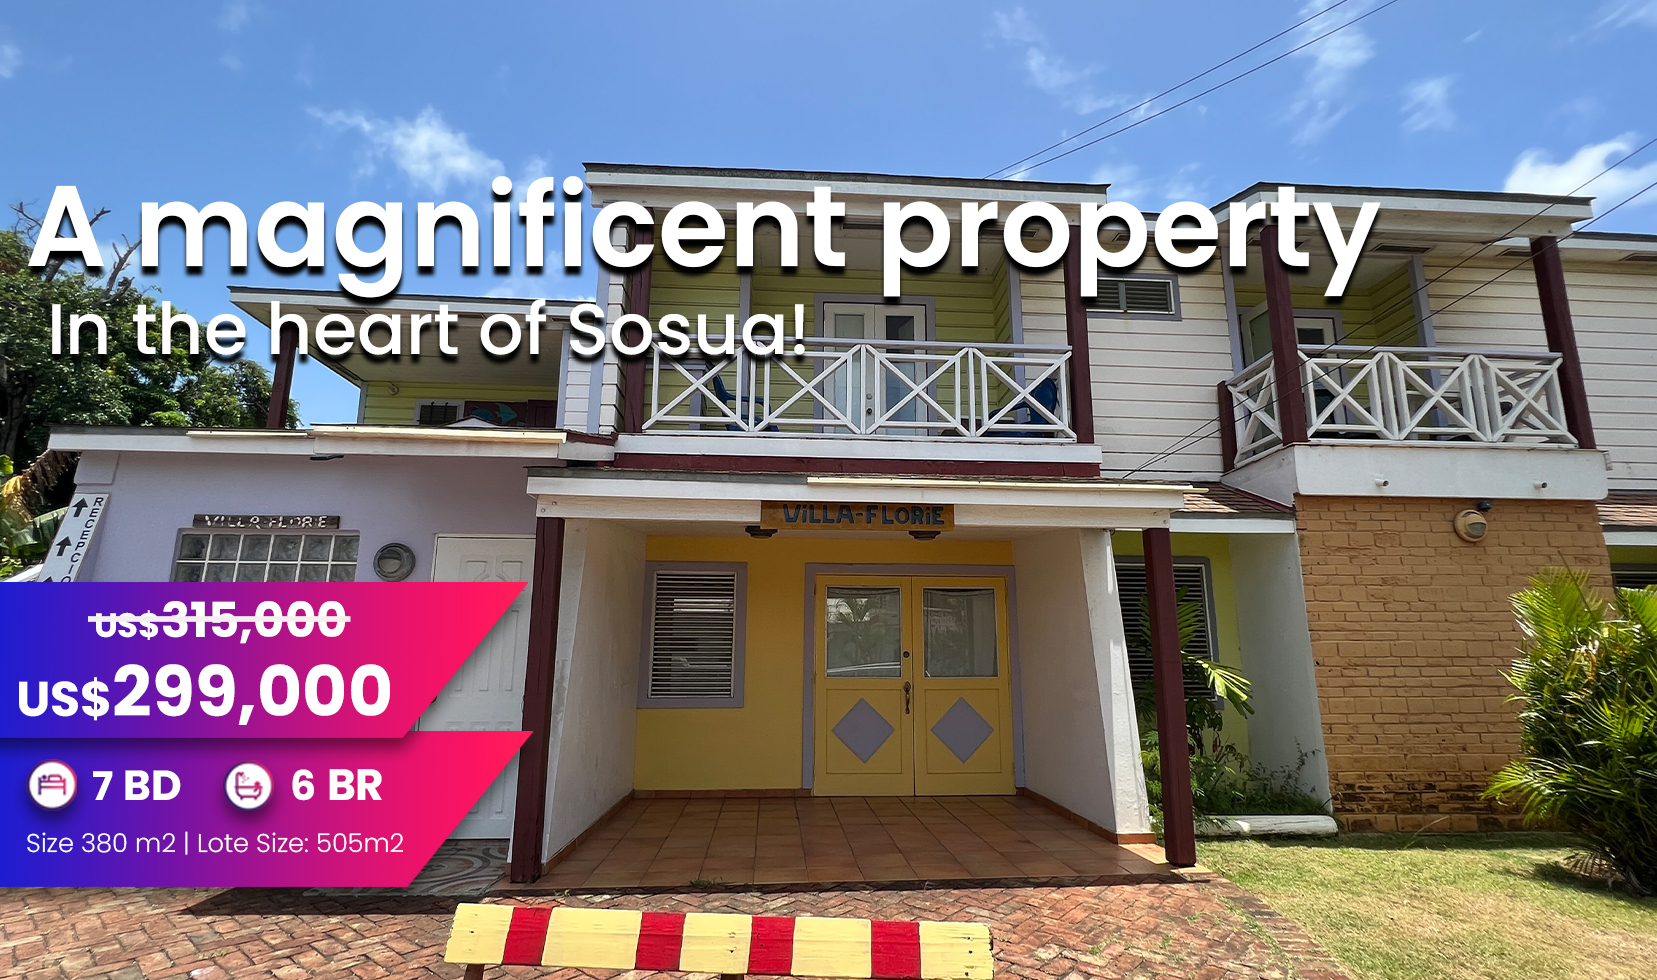 A magnificent property in the heart of Sosua!